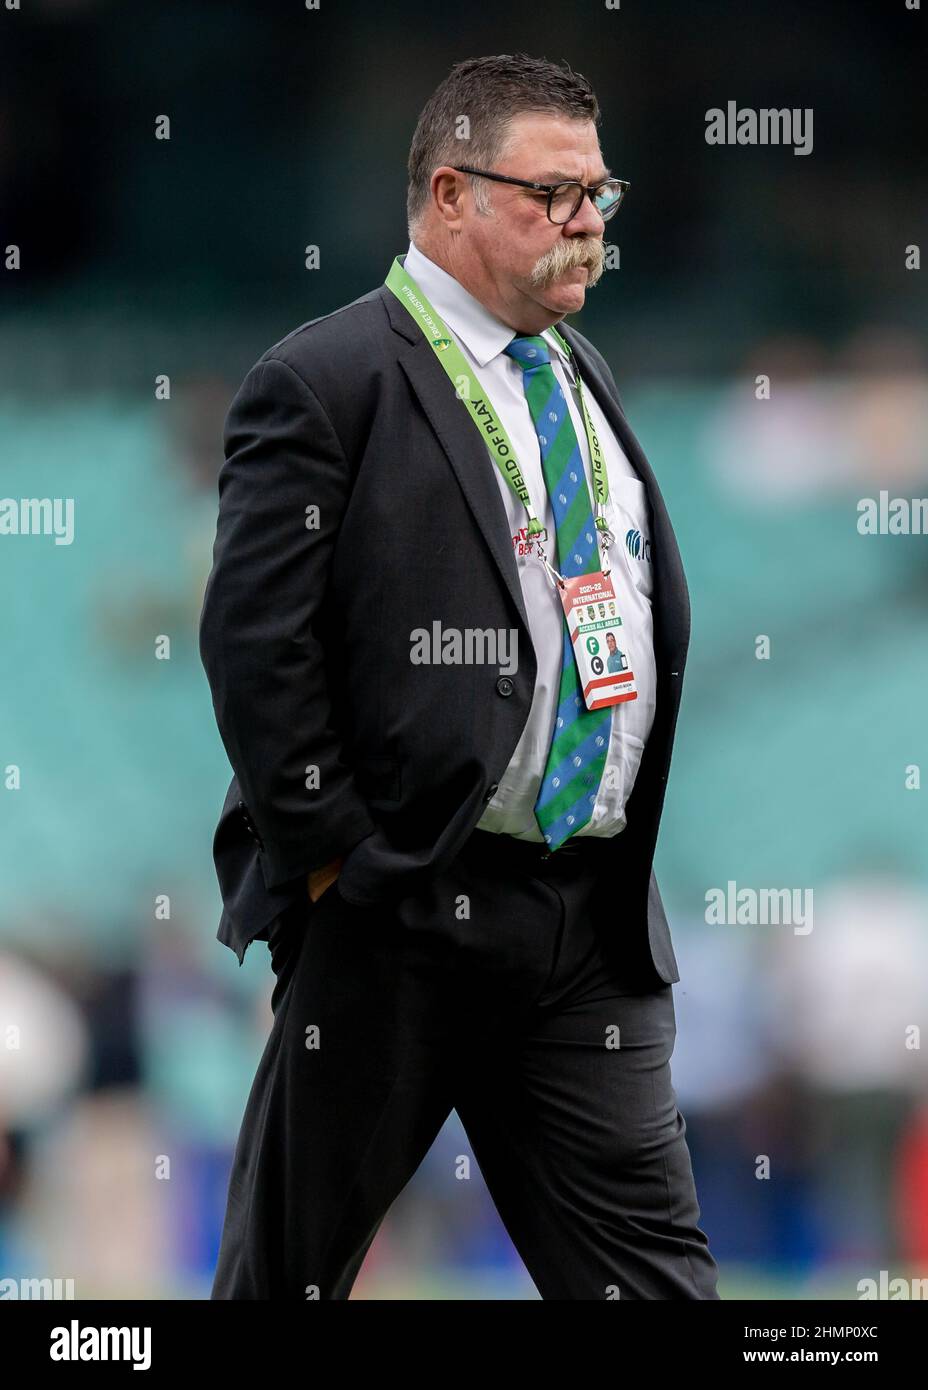 Sydney, Australia. 11th Feb, 2022. ICC Match Referee David Boon during game one in the T20 International series between Australia and Sri Lanka at Sydney Cricket Ground on February 11, 2022 in Sydney, Australia. (Editorial use only) Credit: Izhar Ahmed Khan/Alamy Live News/Alamy Live News Stock Photo